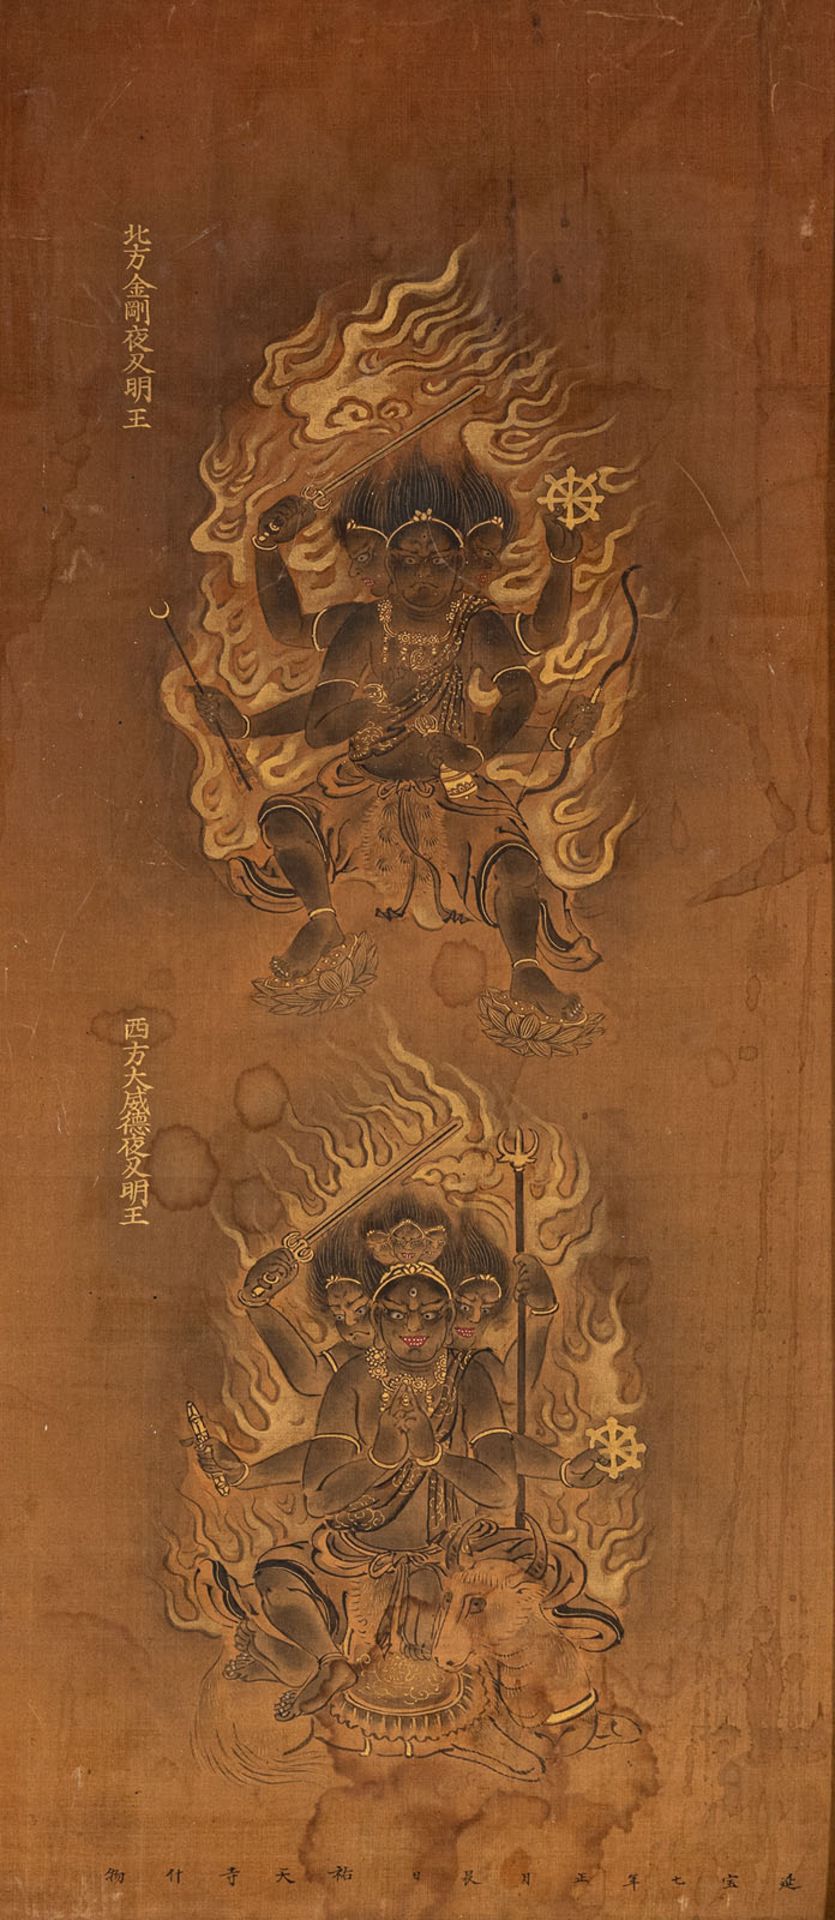 A BUDDHIST PAINTING WITH TWO OF THE FIVE GREAT KINGS OF THE ESOTERIC KNOWNLEDGE (GODAI MYÔÔ)